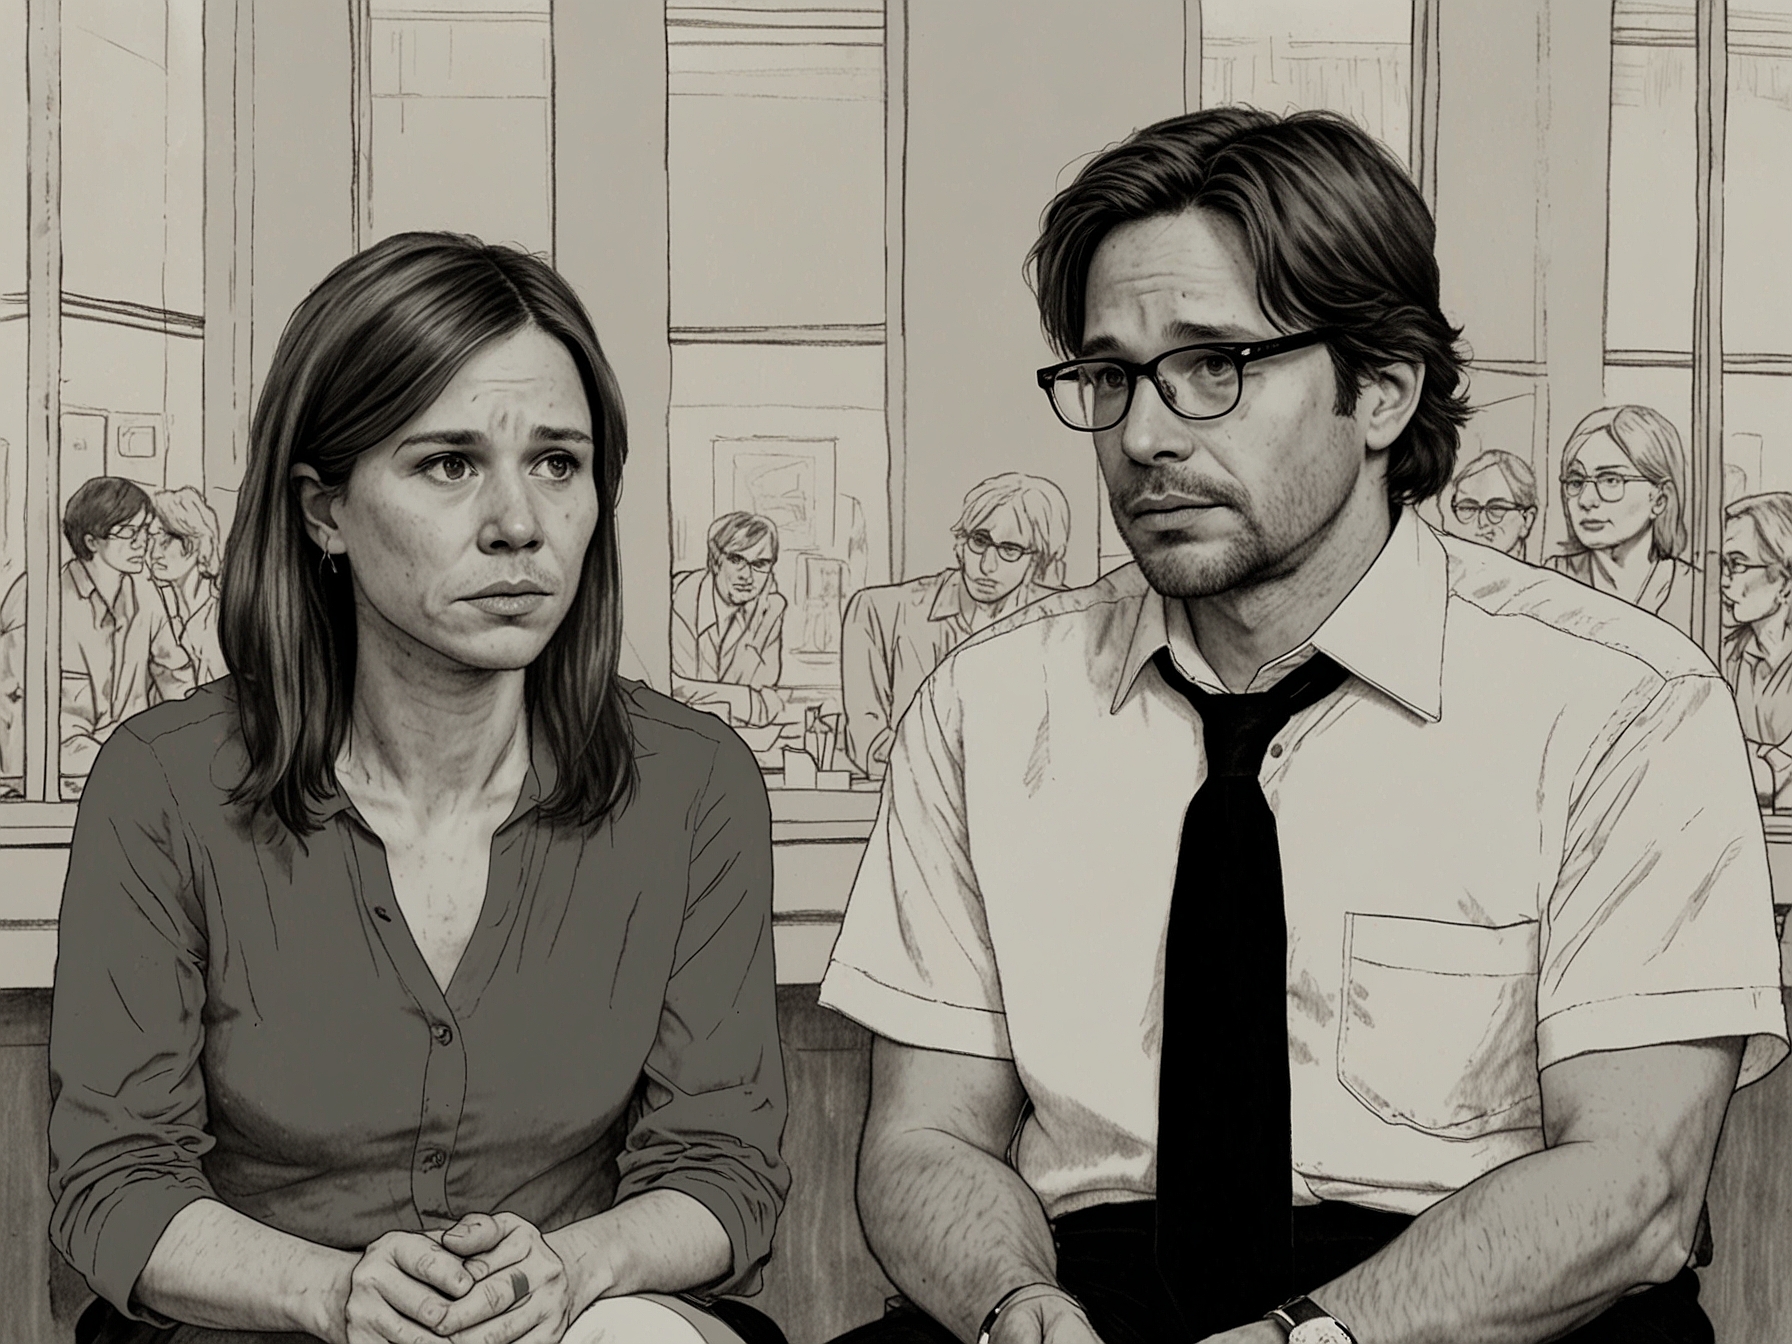 An emotionally charged moment from 'The Vow' captures the expressions of ex-NXIVM members recounting their experiences, emphasizing the psychological control exerted by leader Keith Raniere.